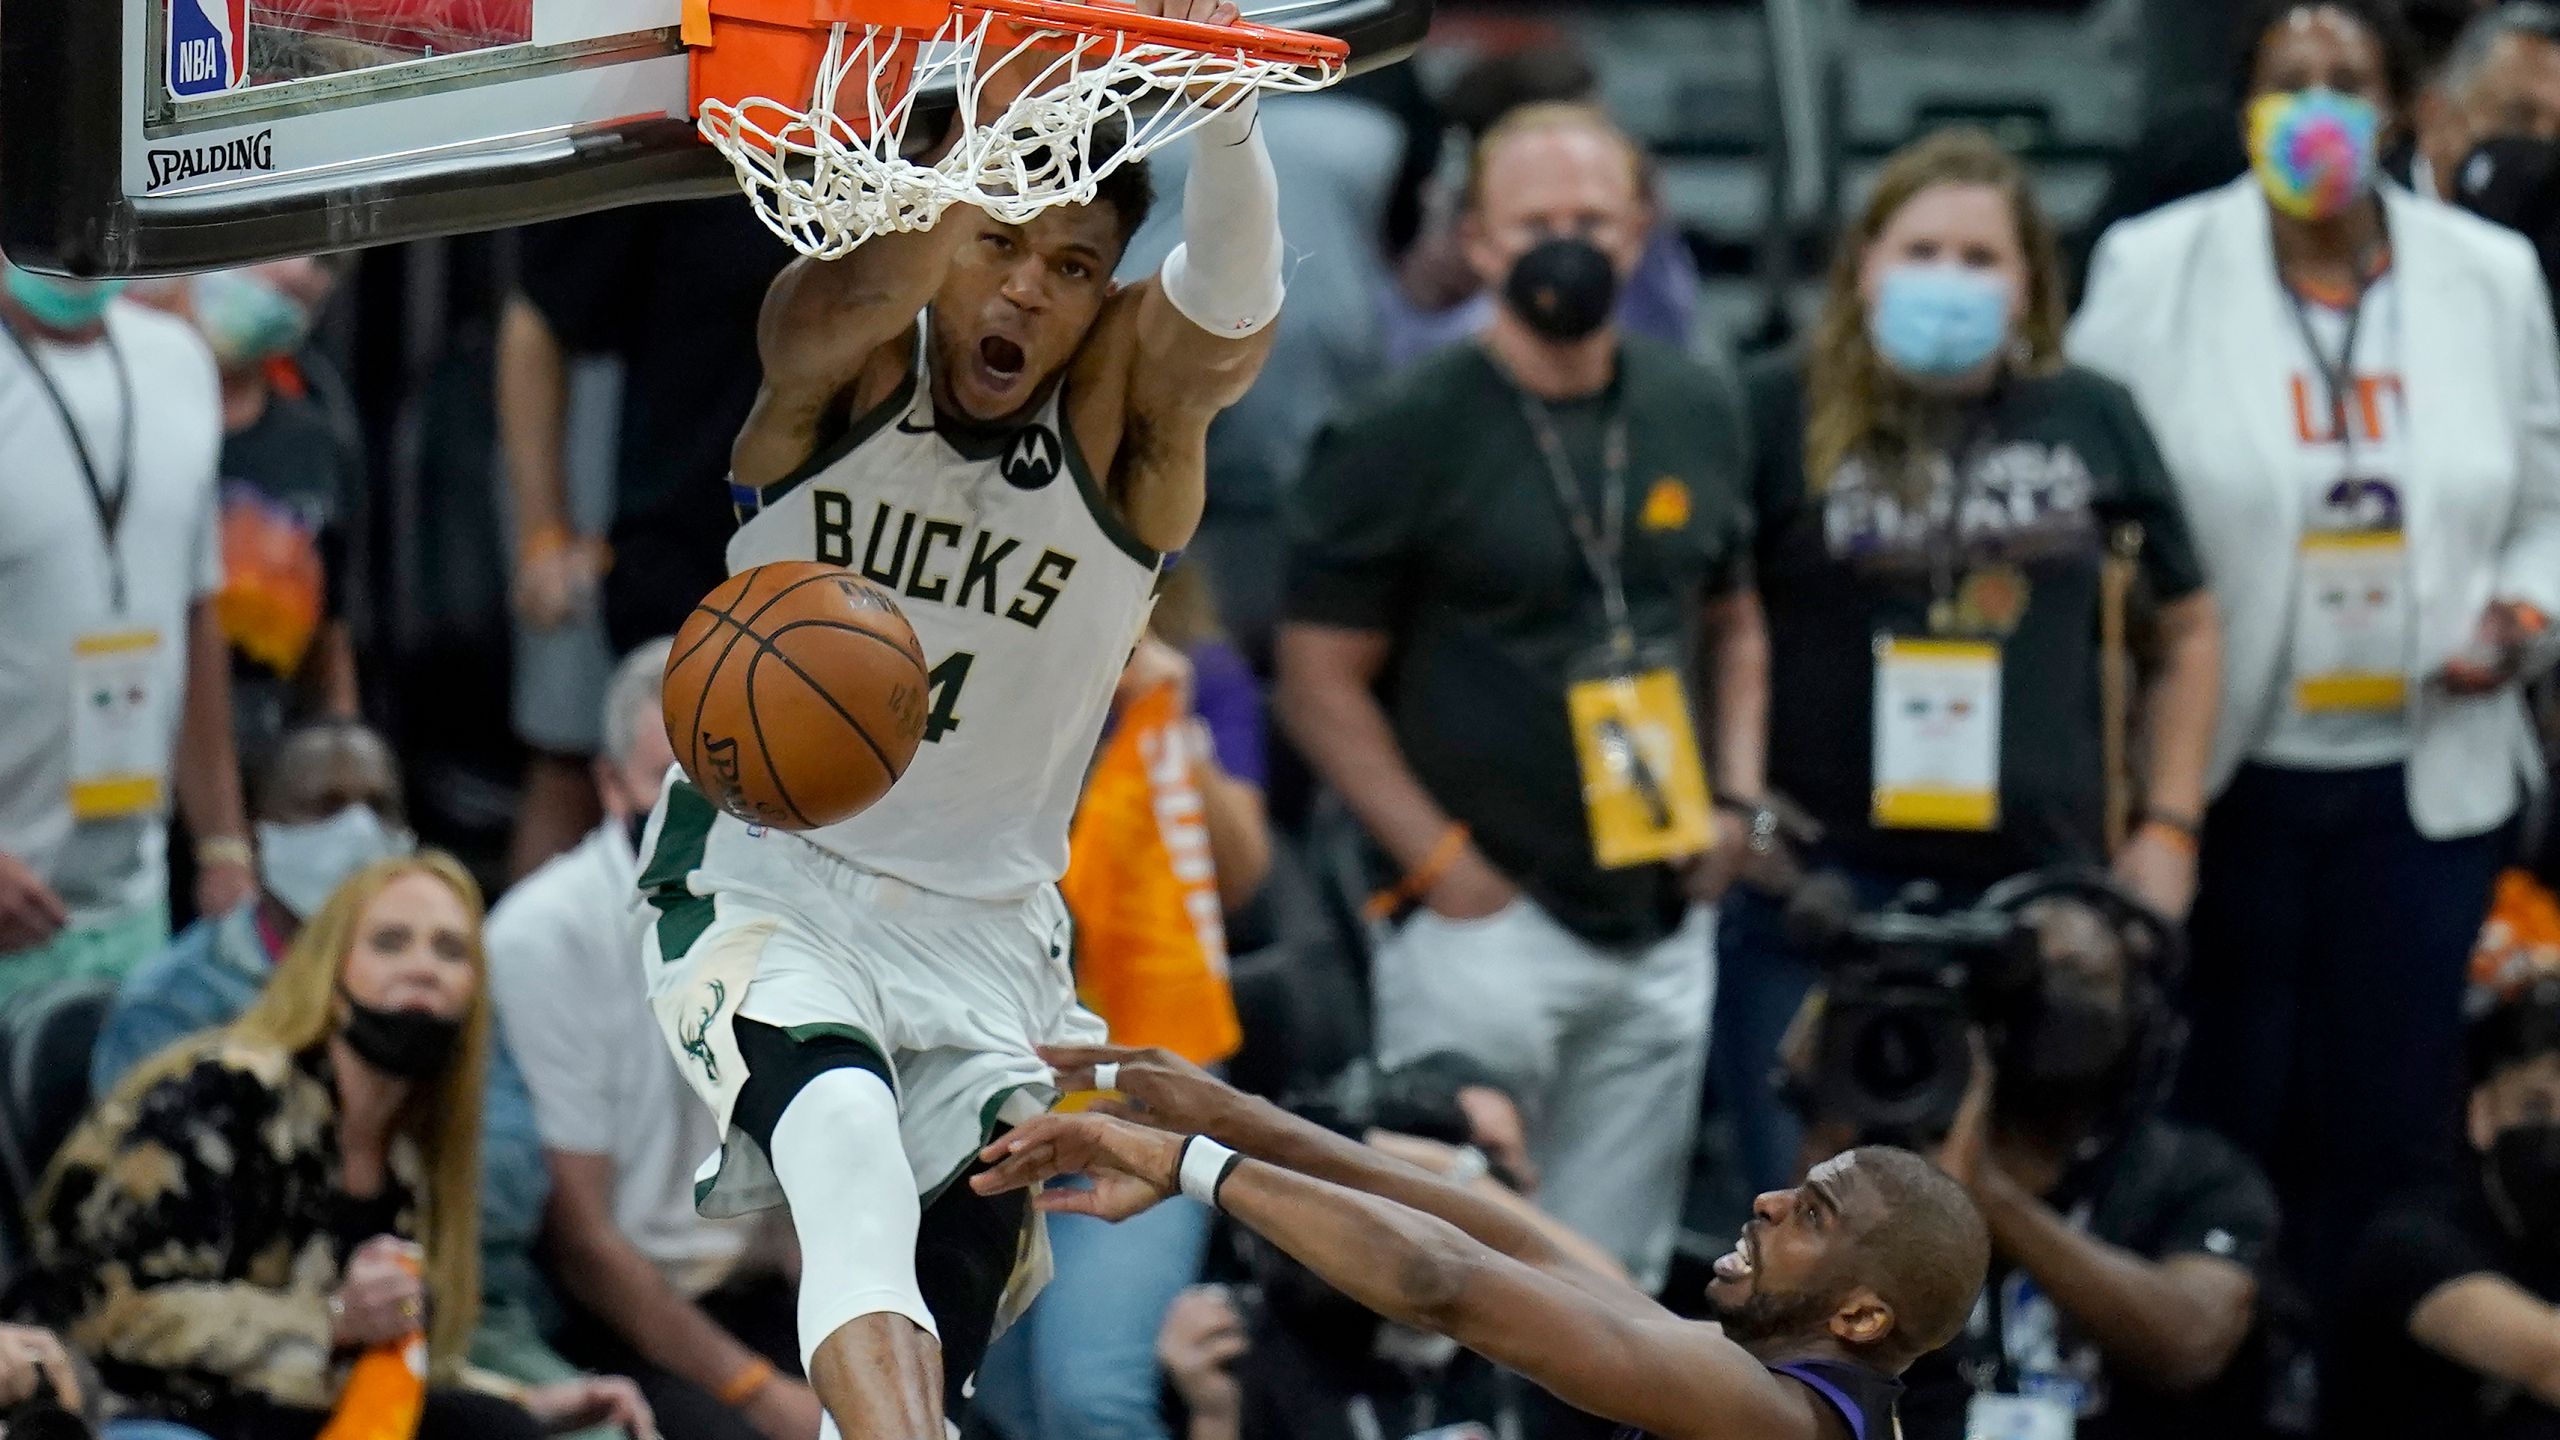 Bucks win first NBA championship in fifty years. WFRV Local 5 Bay, Appleton